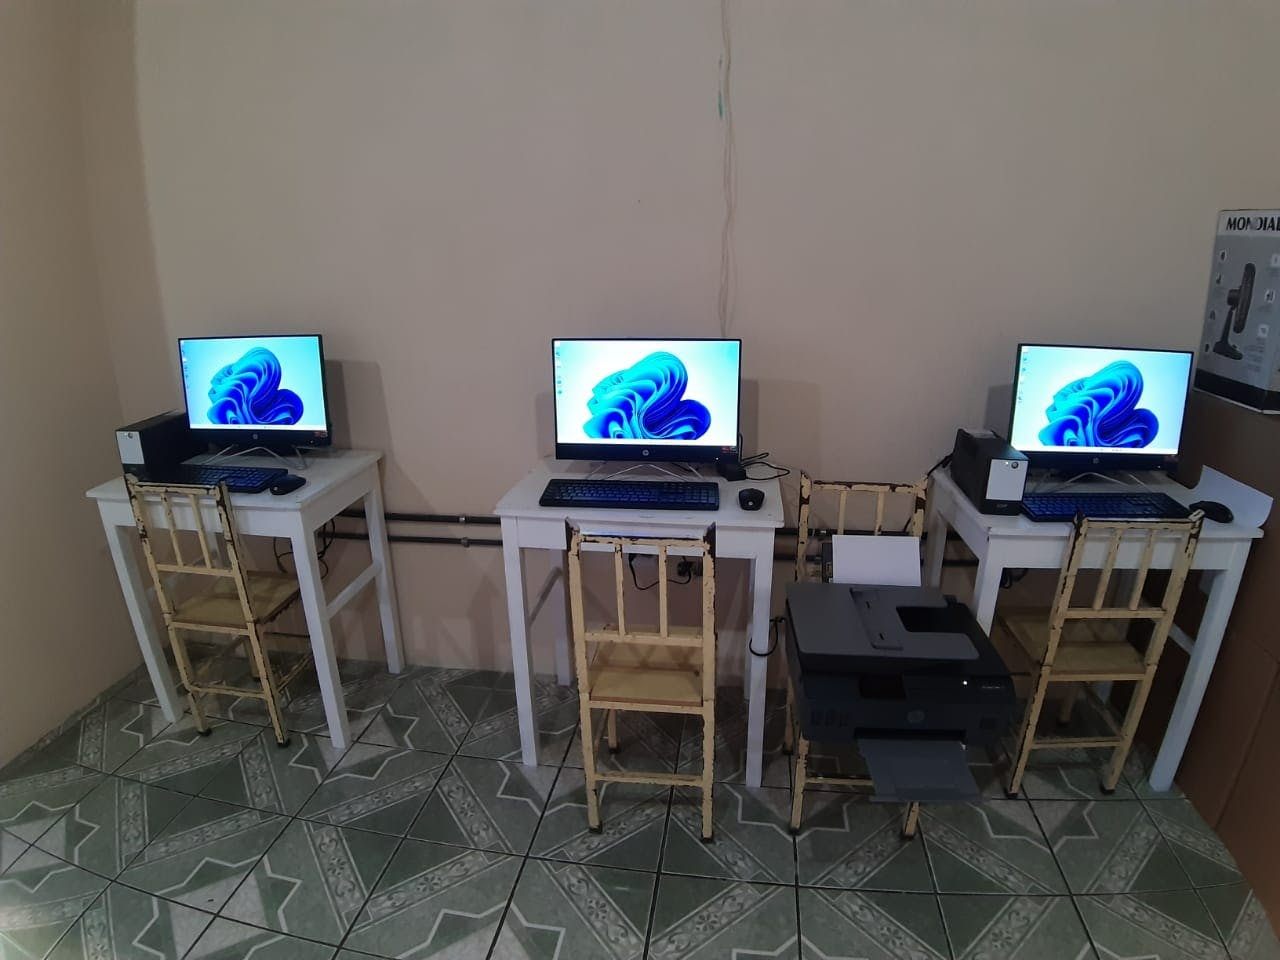 technology learning center in operation